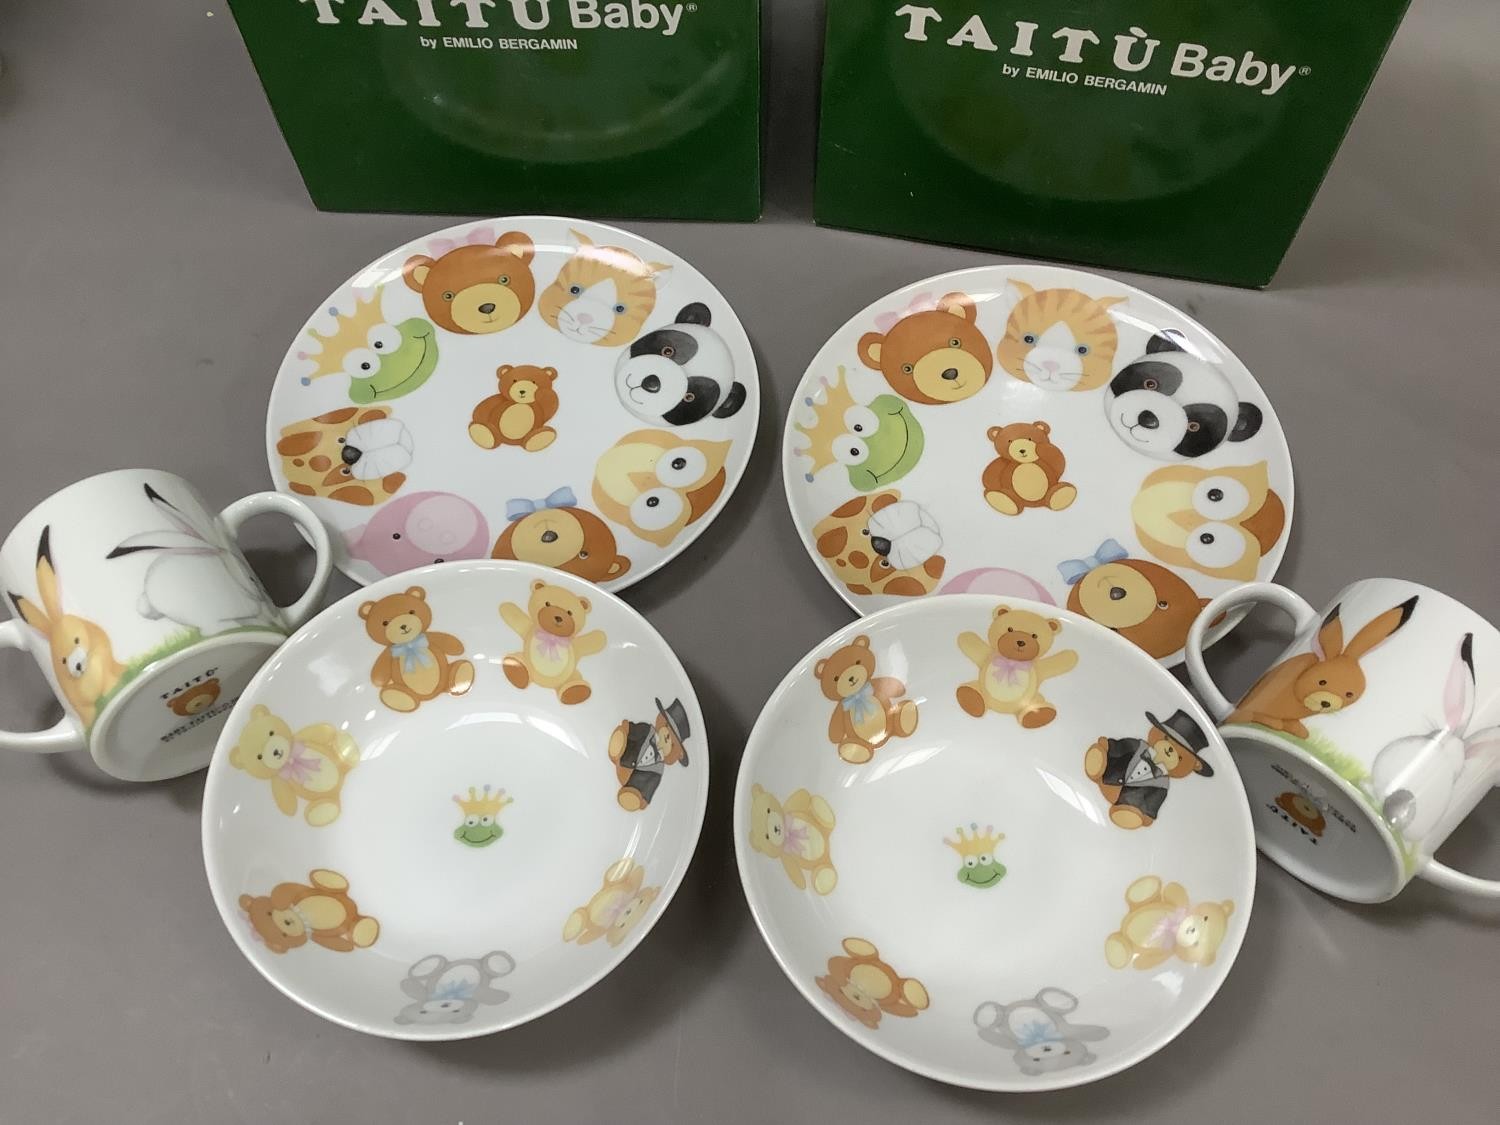 Two boxed Taitu Baby sets by Emilio Bergamin of Teddy Bear design each comprising two handled mug, - Image 2 of 3